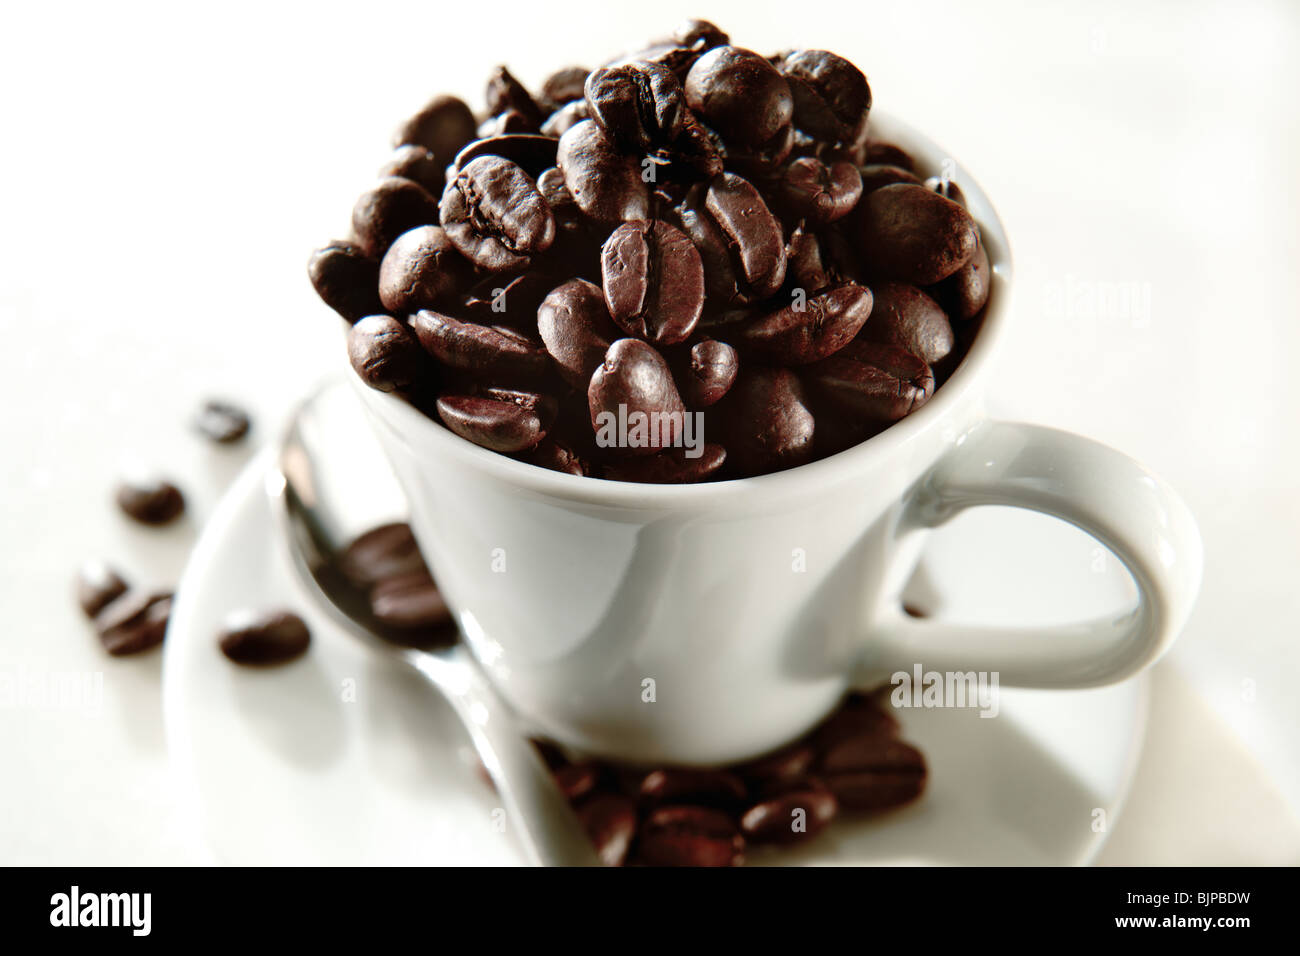 Fresh coffee beans in a coffee cup. Drink photos. Stock Photo